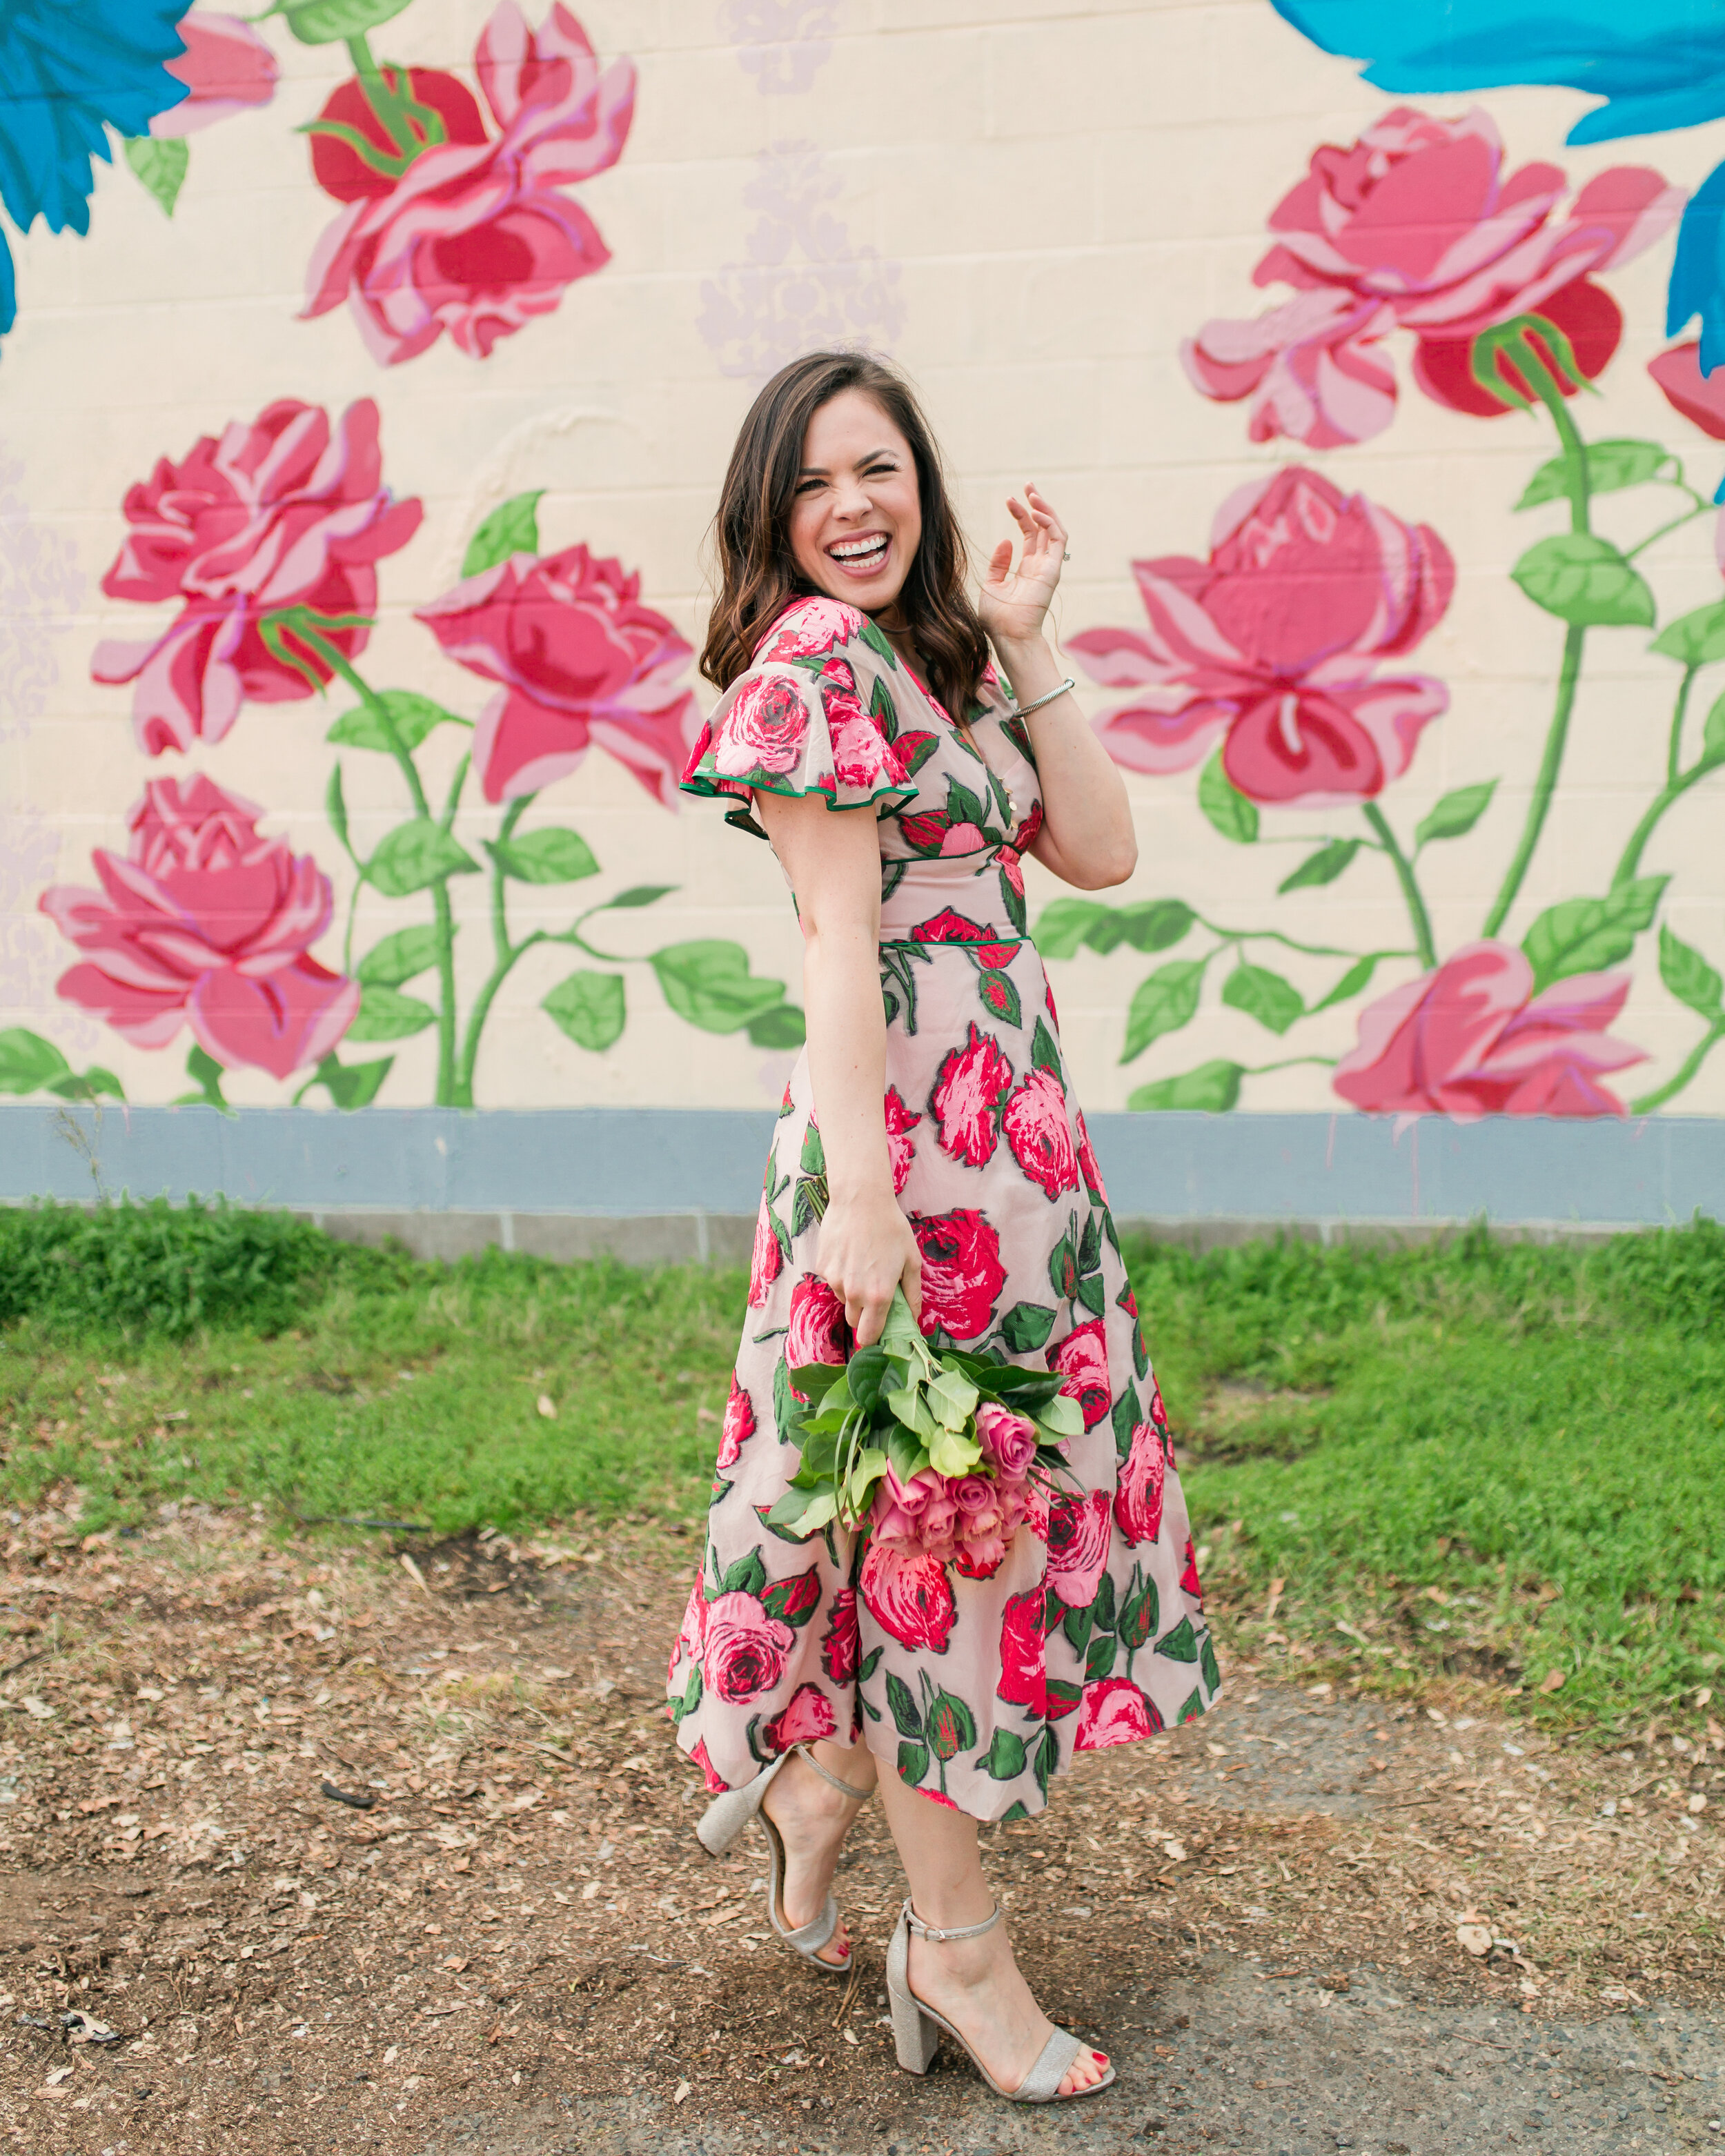 ChristinaBestPhotography_Dressed_to_Match_Michelle_roses-24.jpg